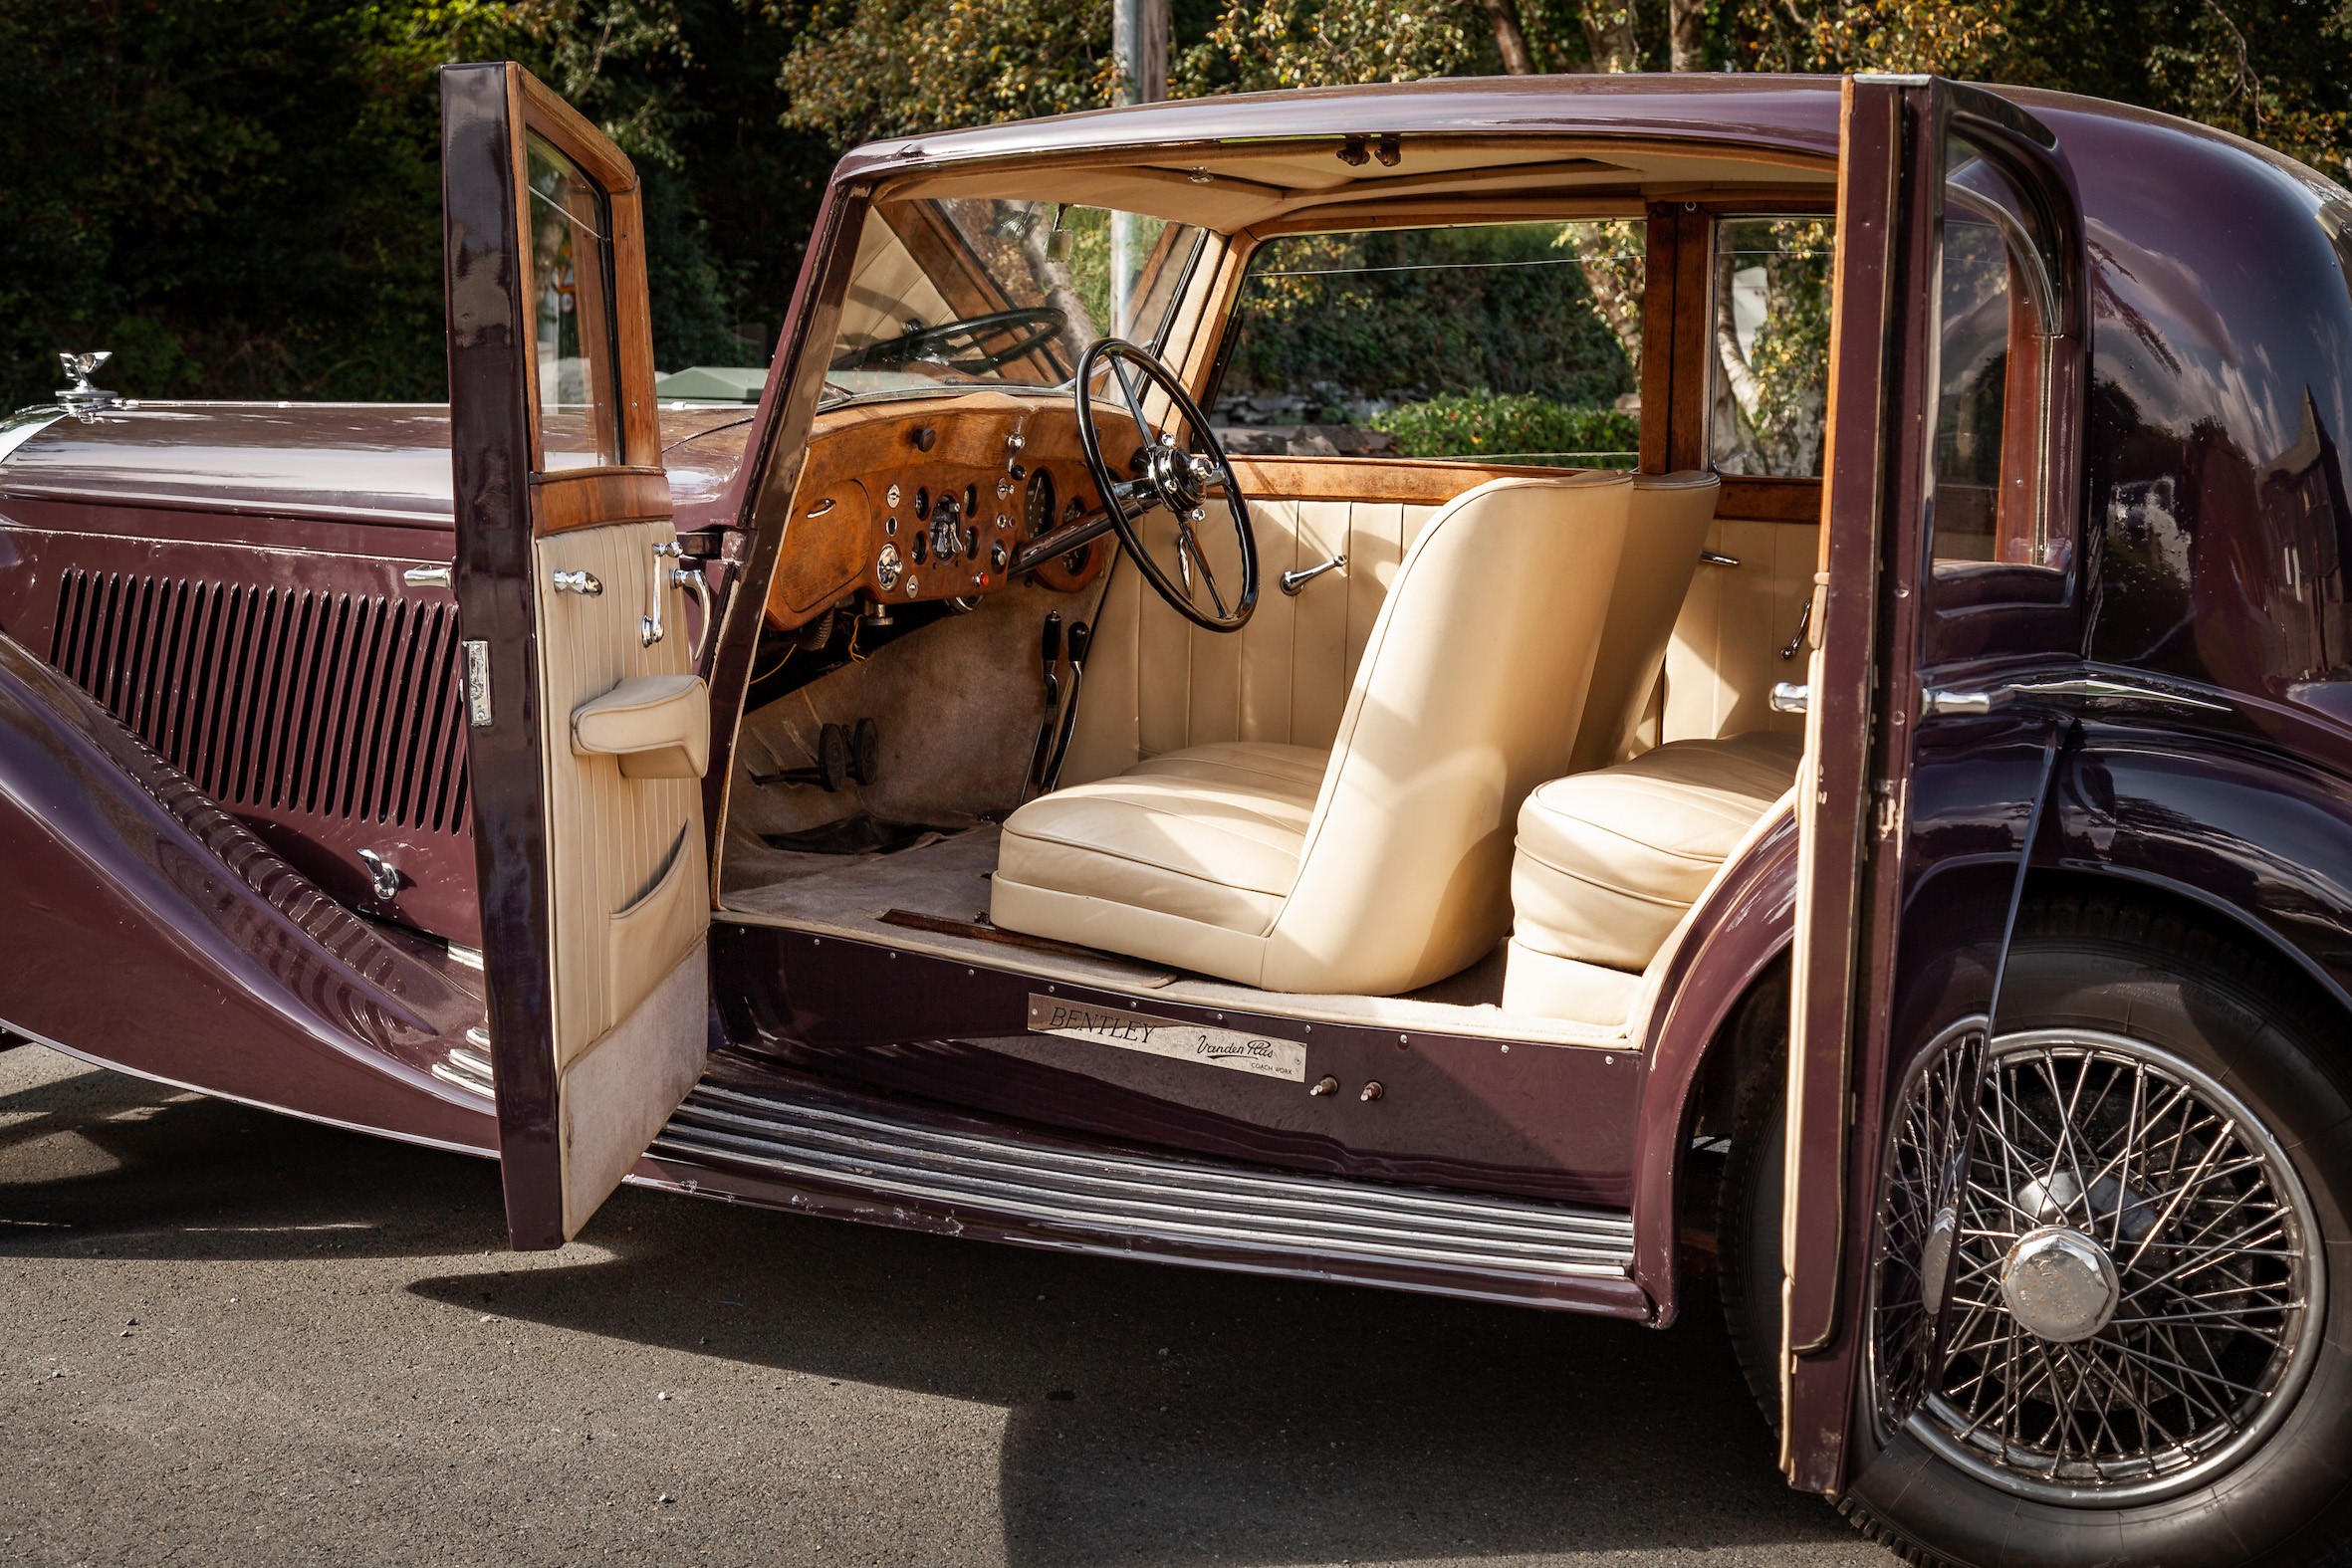 1937 Bentley for sale H&H Classics Buxton pavilion gardens 6th October